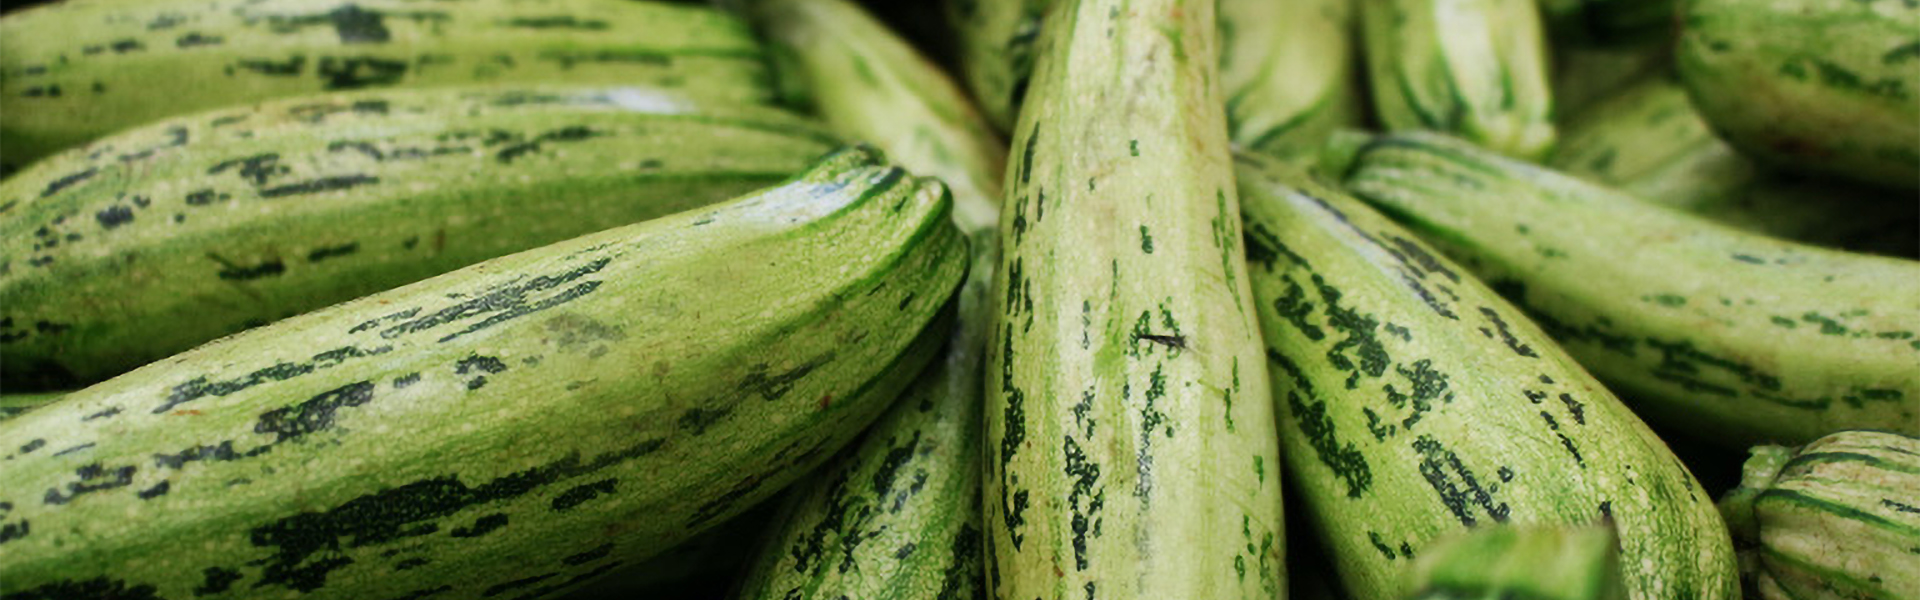 Know Your Food: Zucchini